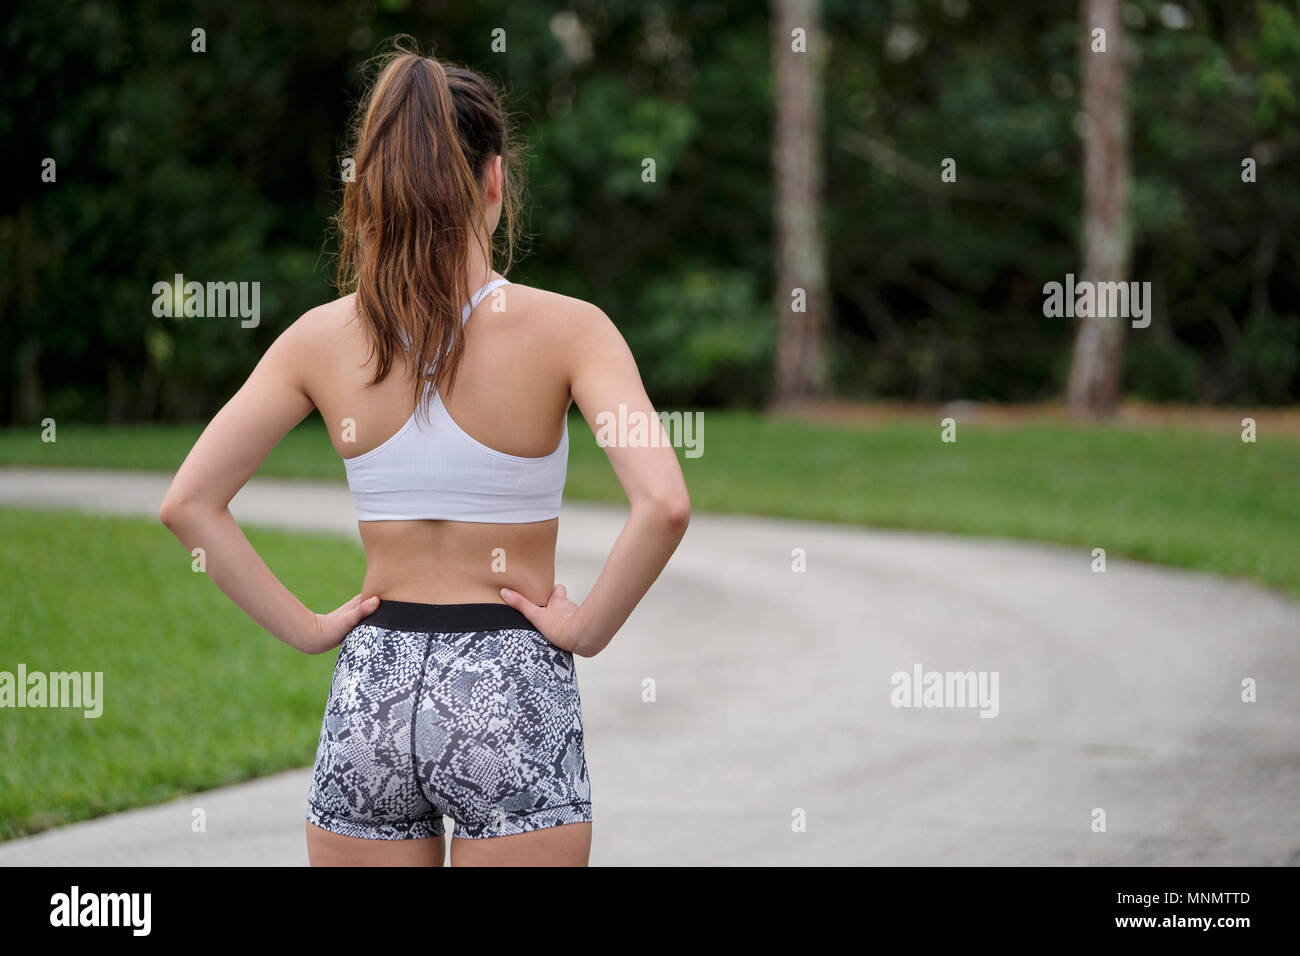 Rear view of woman jogging in park Stock Photo